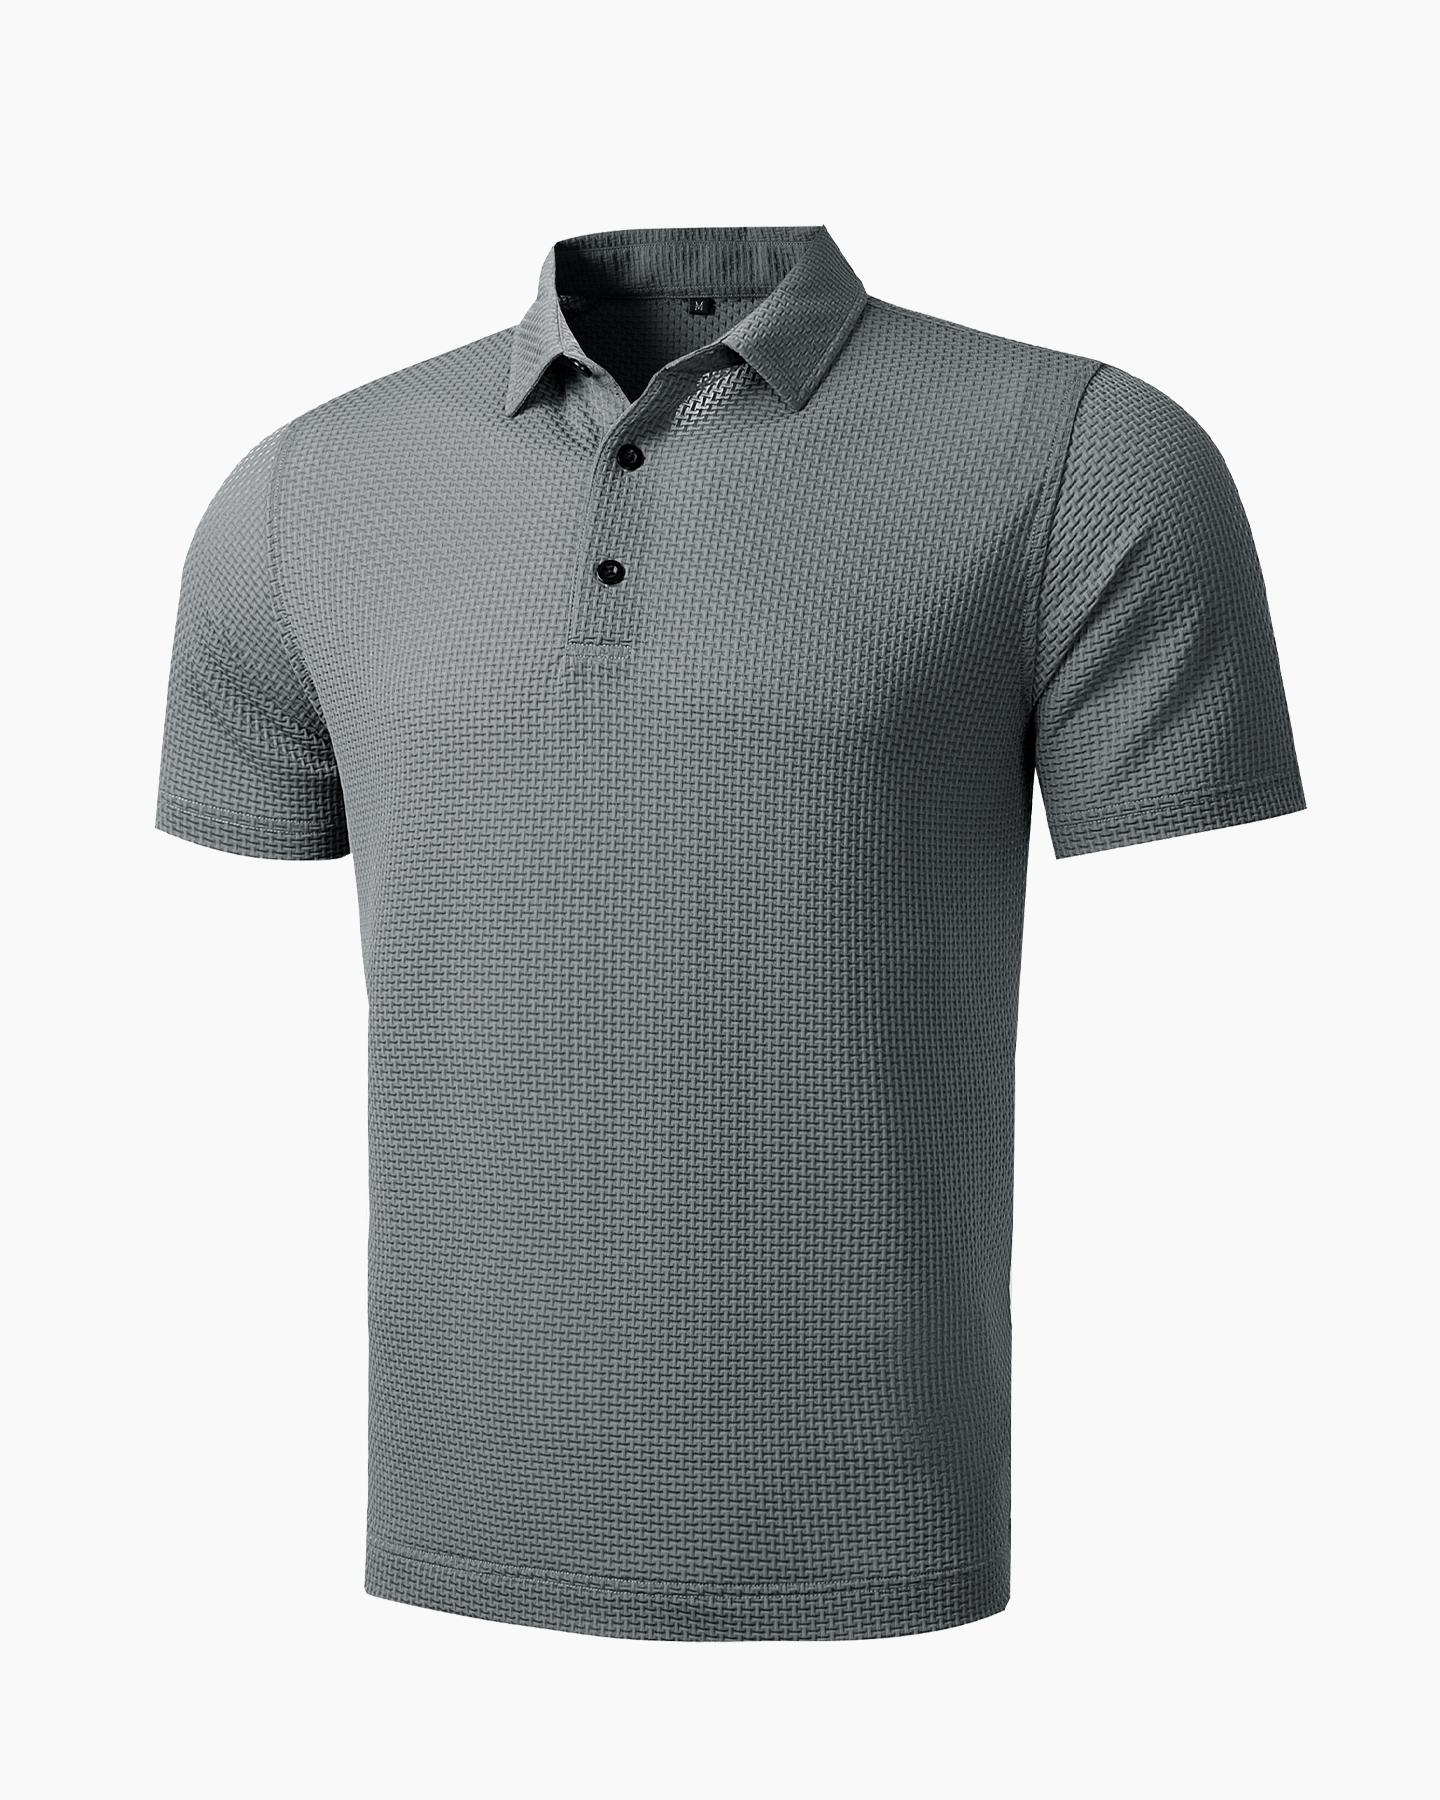 Knit Polo Shirt in grey by Deolax